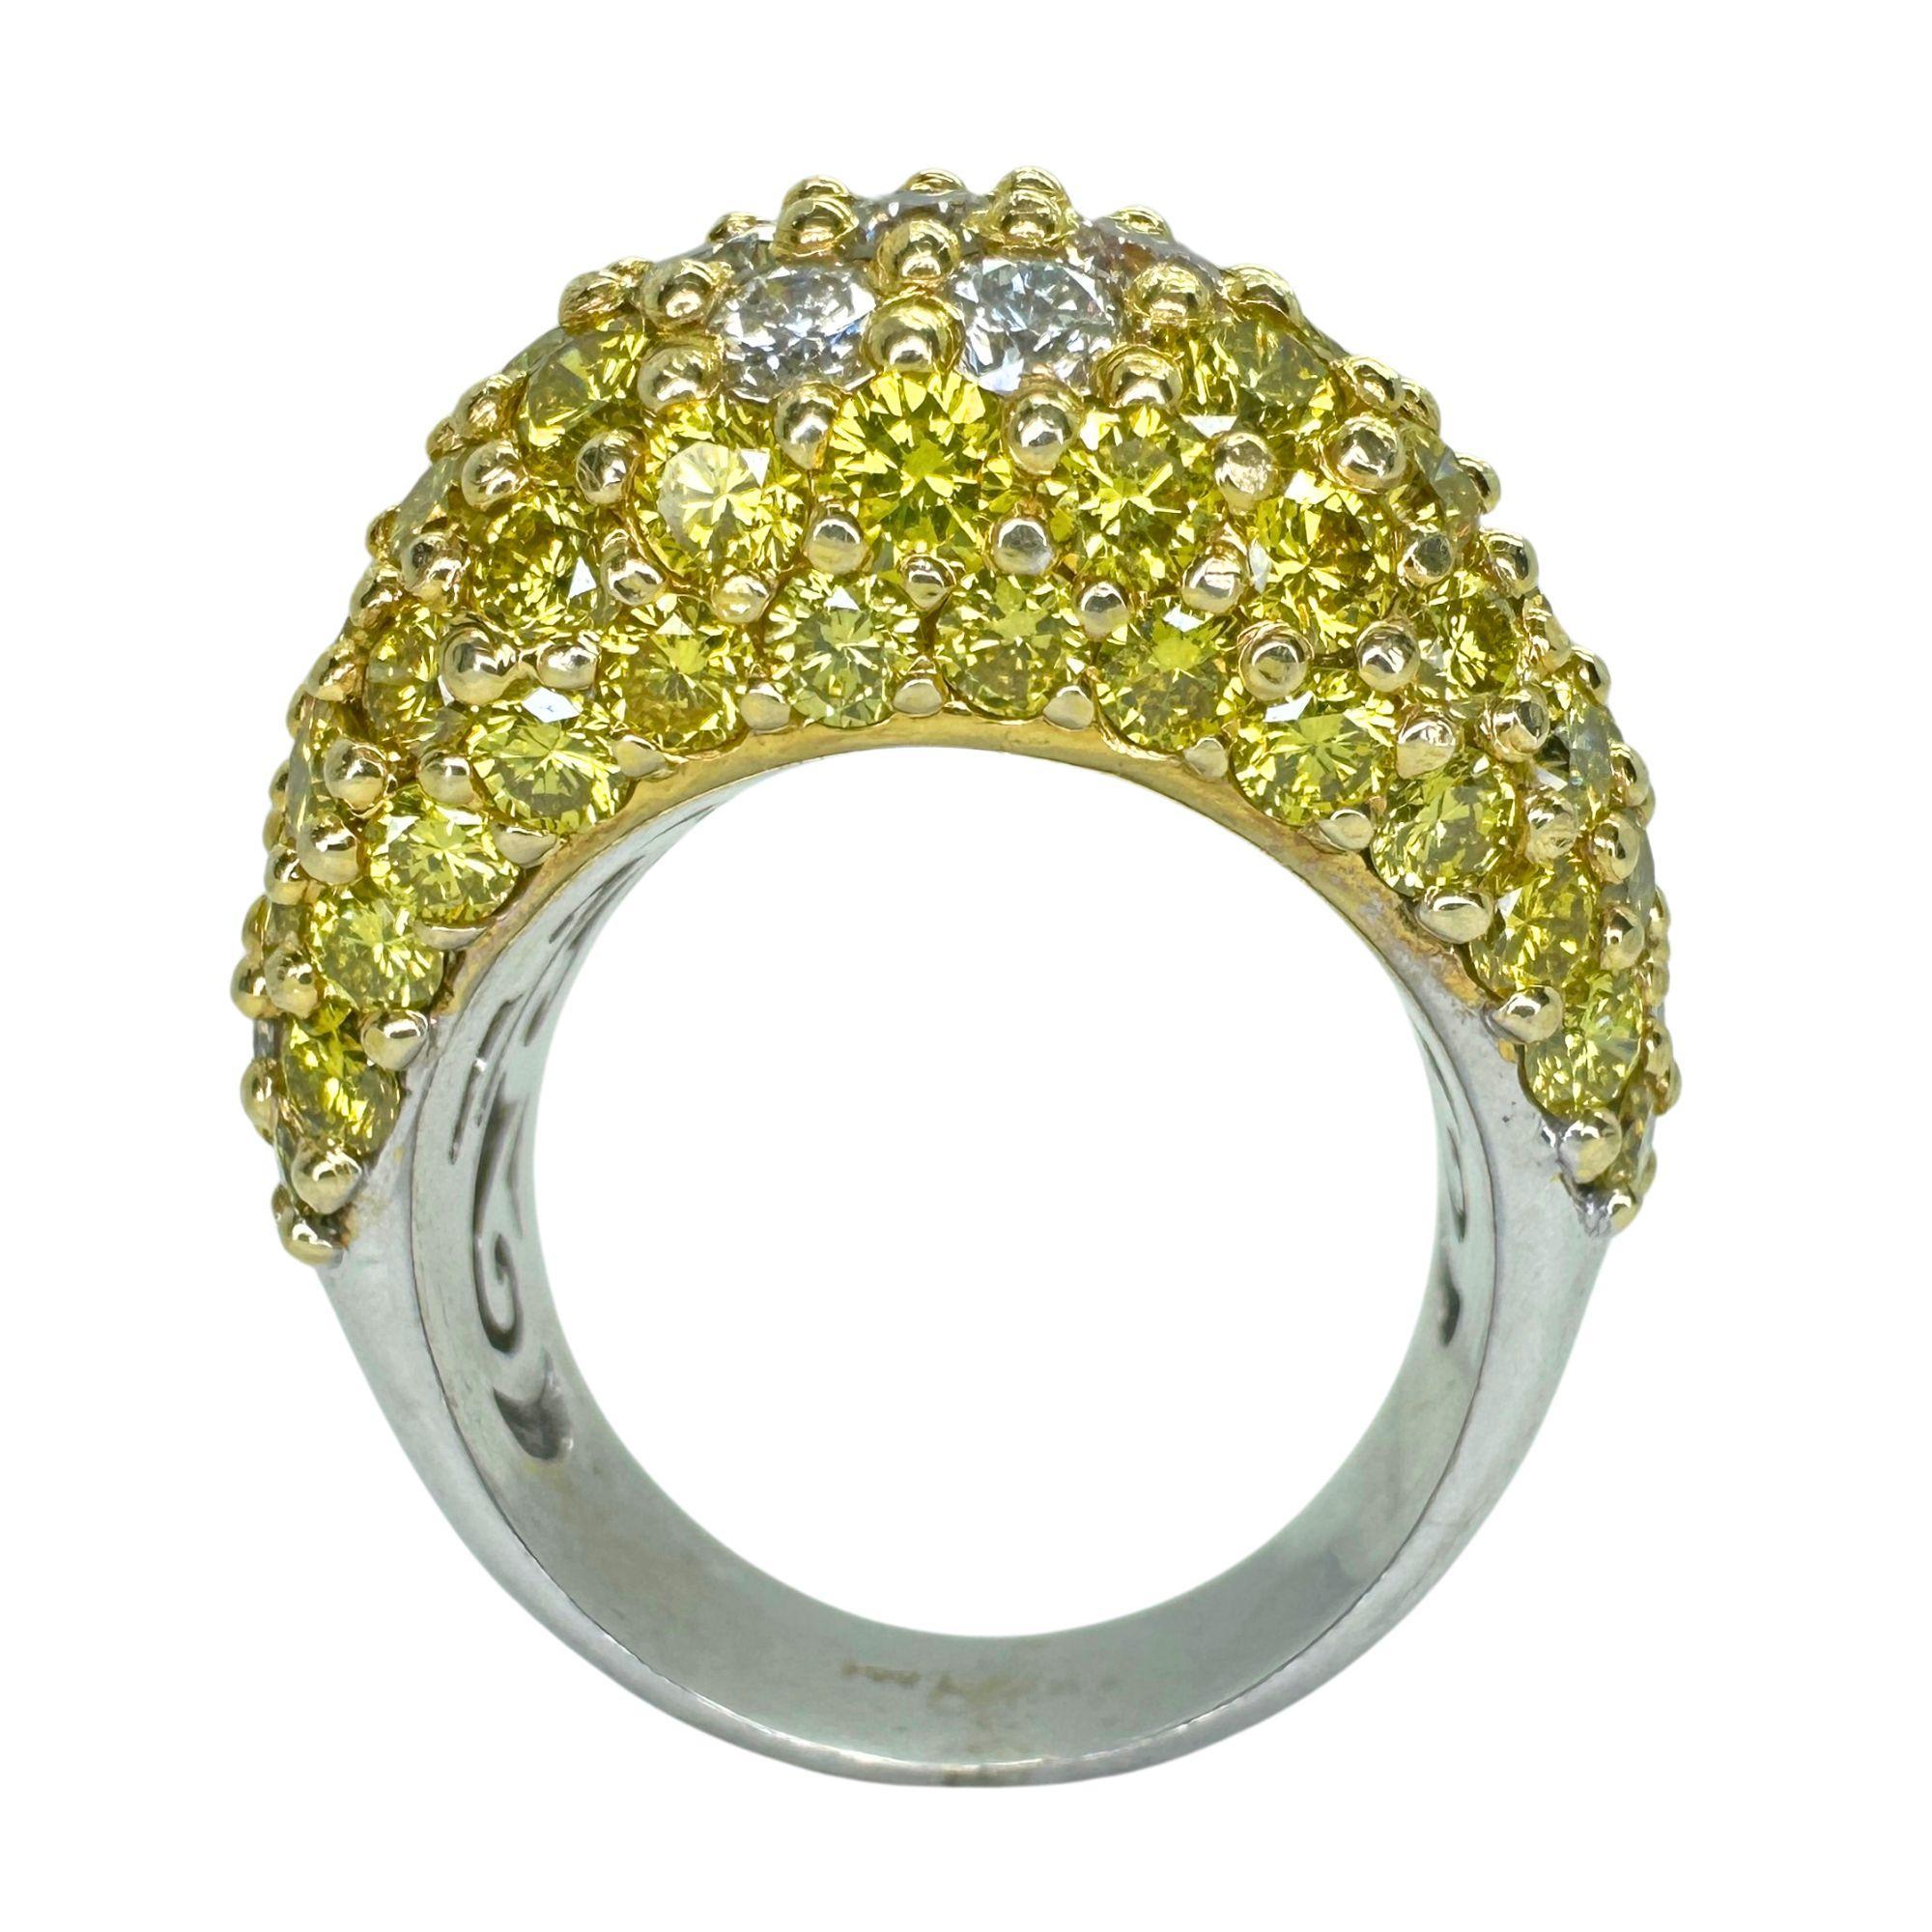 18k Heavy White and Yellow Diamond Ring In Good Condition For Sale In New York, NY